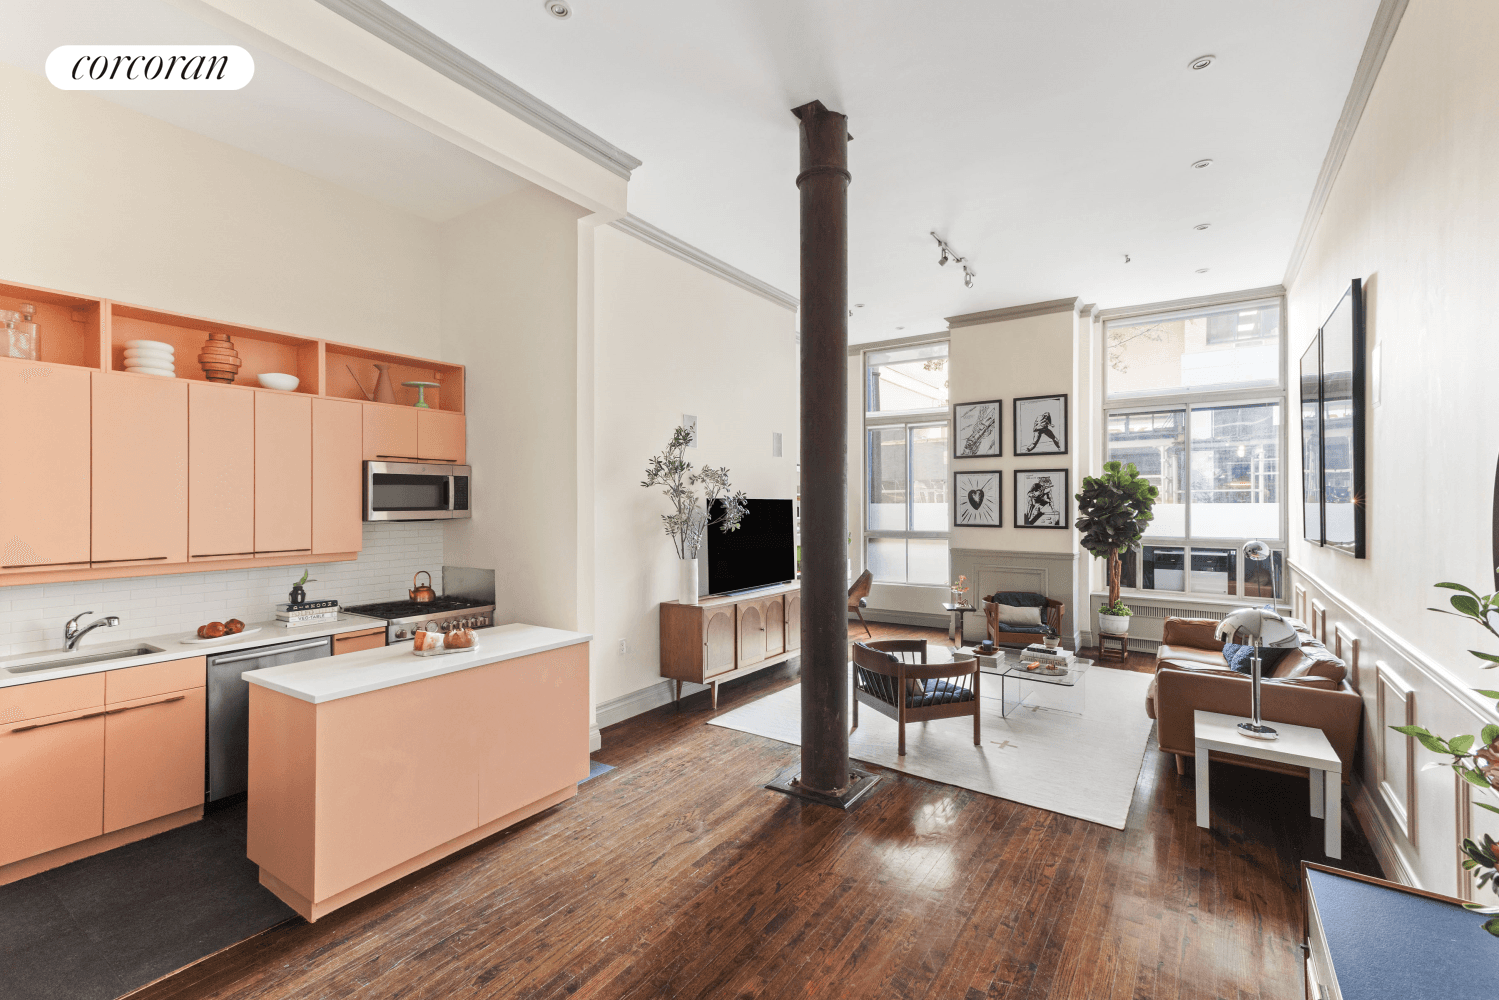 Exquisite Duplex Loft with 13' ceilings in the heart of Greenwich Village featuring Two Bedrooms Two baths Flex SpaceWith a rare and authentic combination of pre war details and modern ...